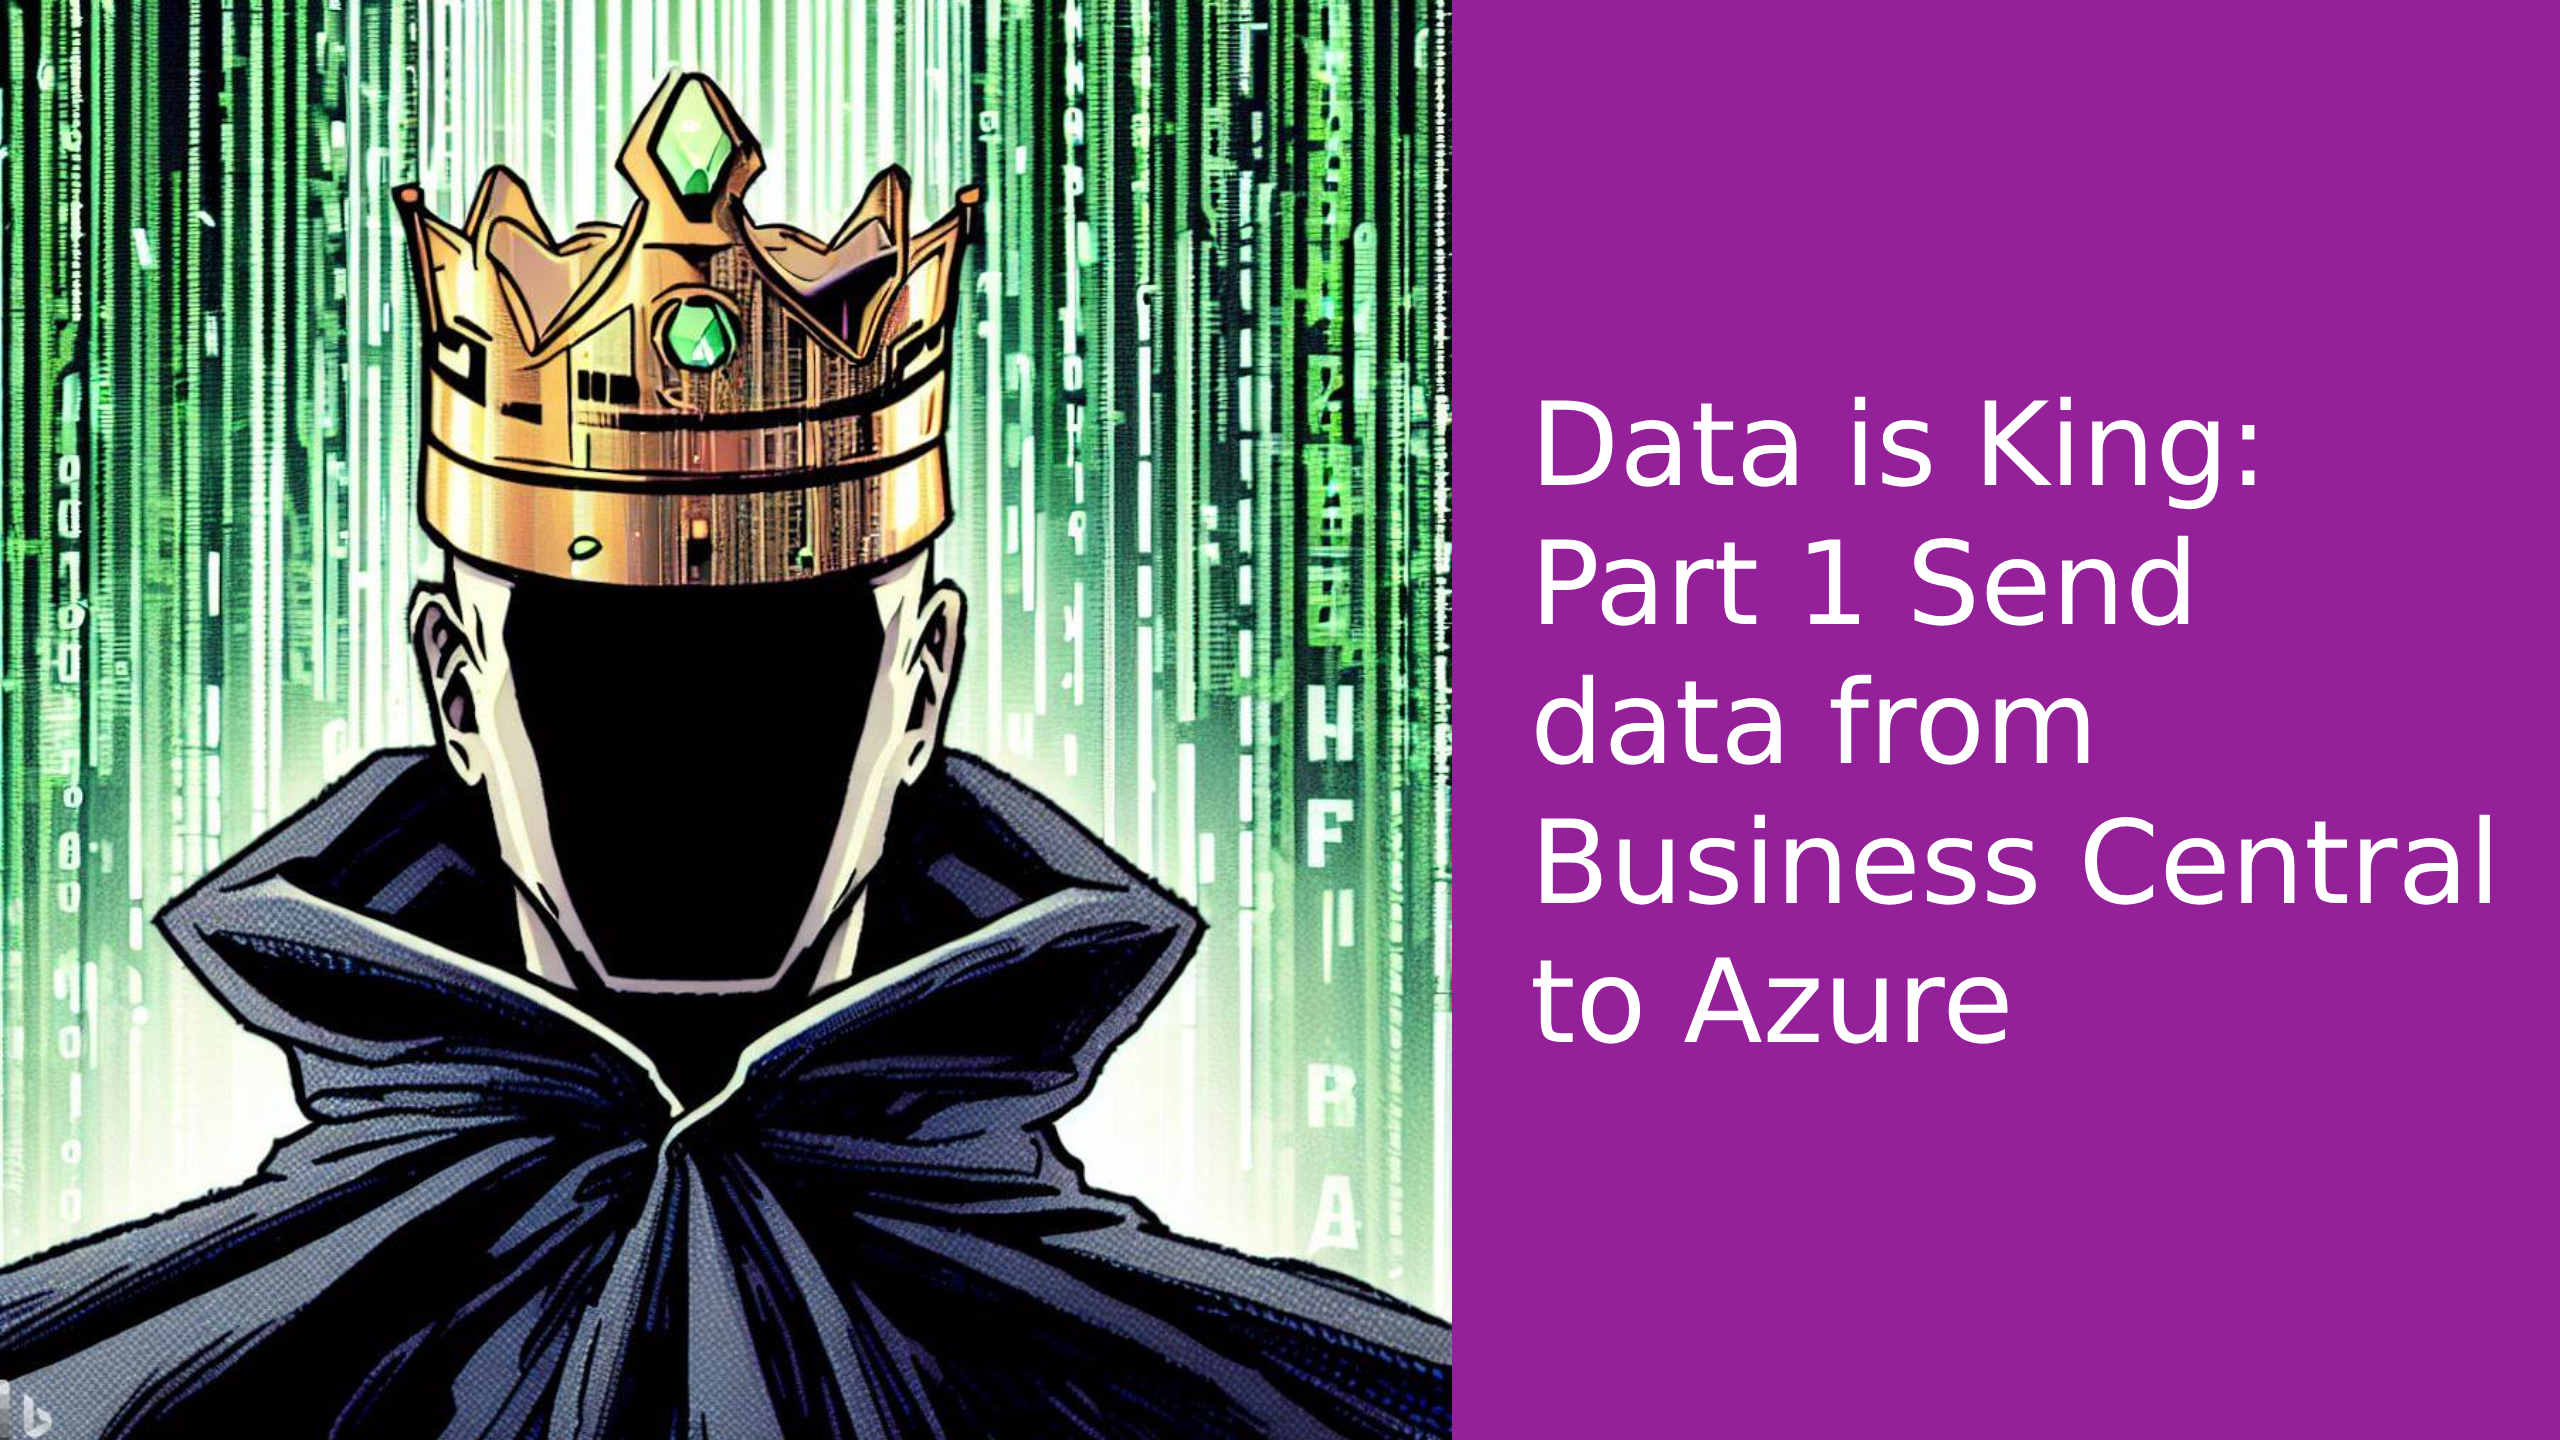 Data is King: Part 1 Send data from Business Central to Azure